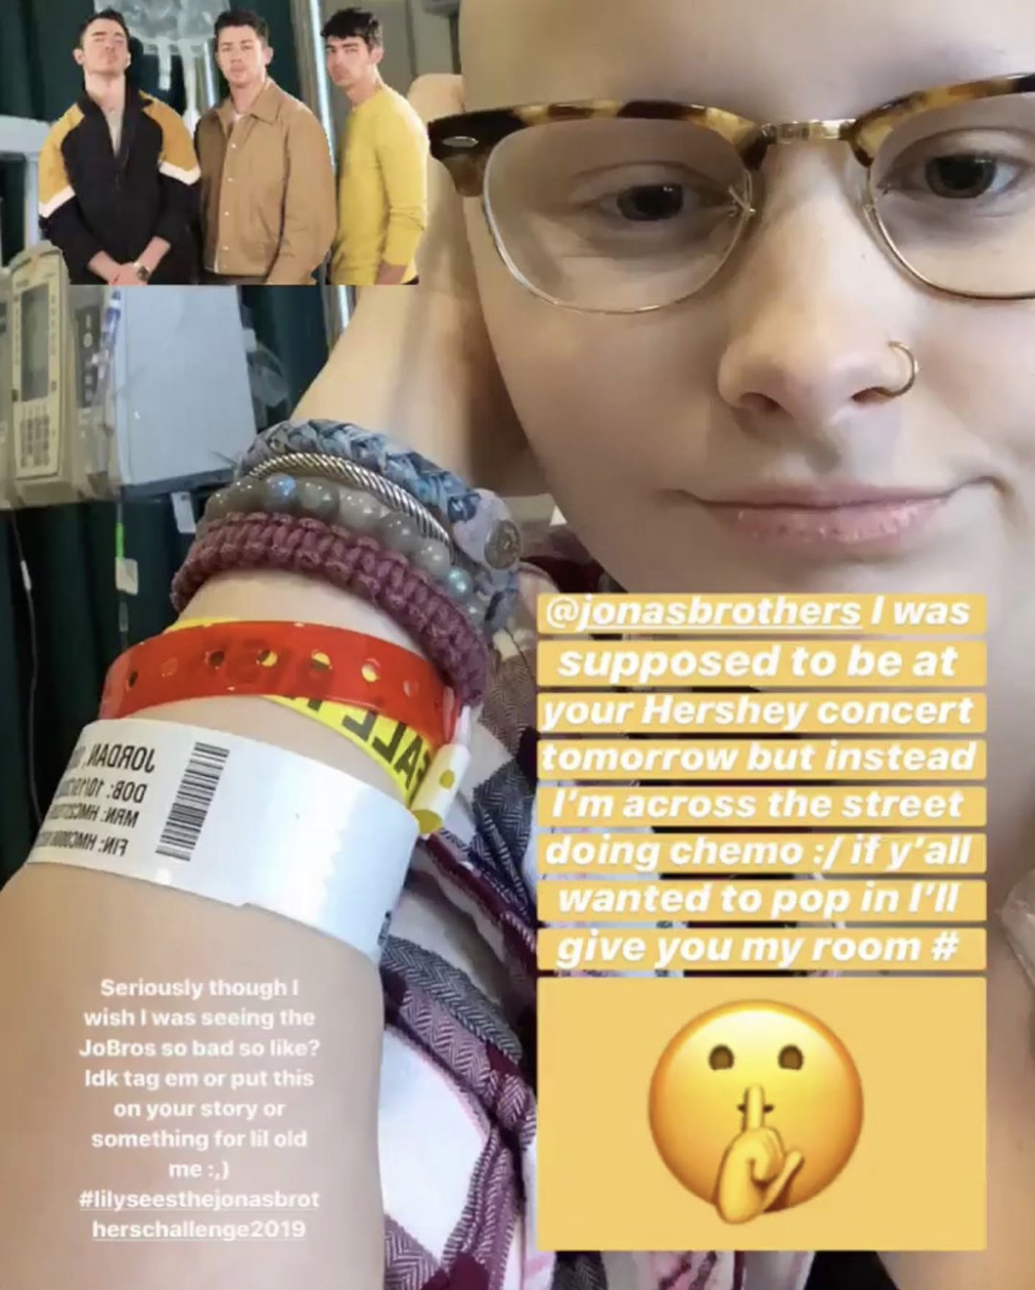 “I was supposed to be at your Hershey concert tomorrow but instead I’m across the street doing chemo,” wrote Lily. “If y’all wanted to pop in, I’ll give you my room number.”